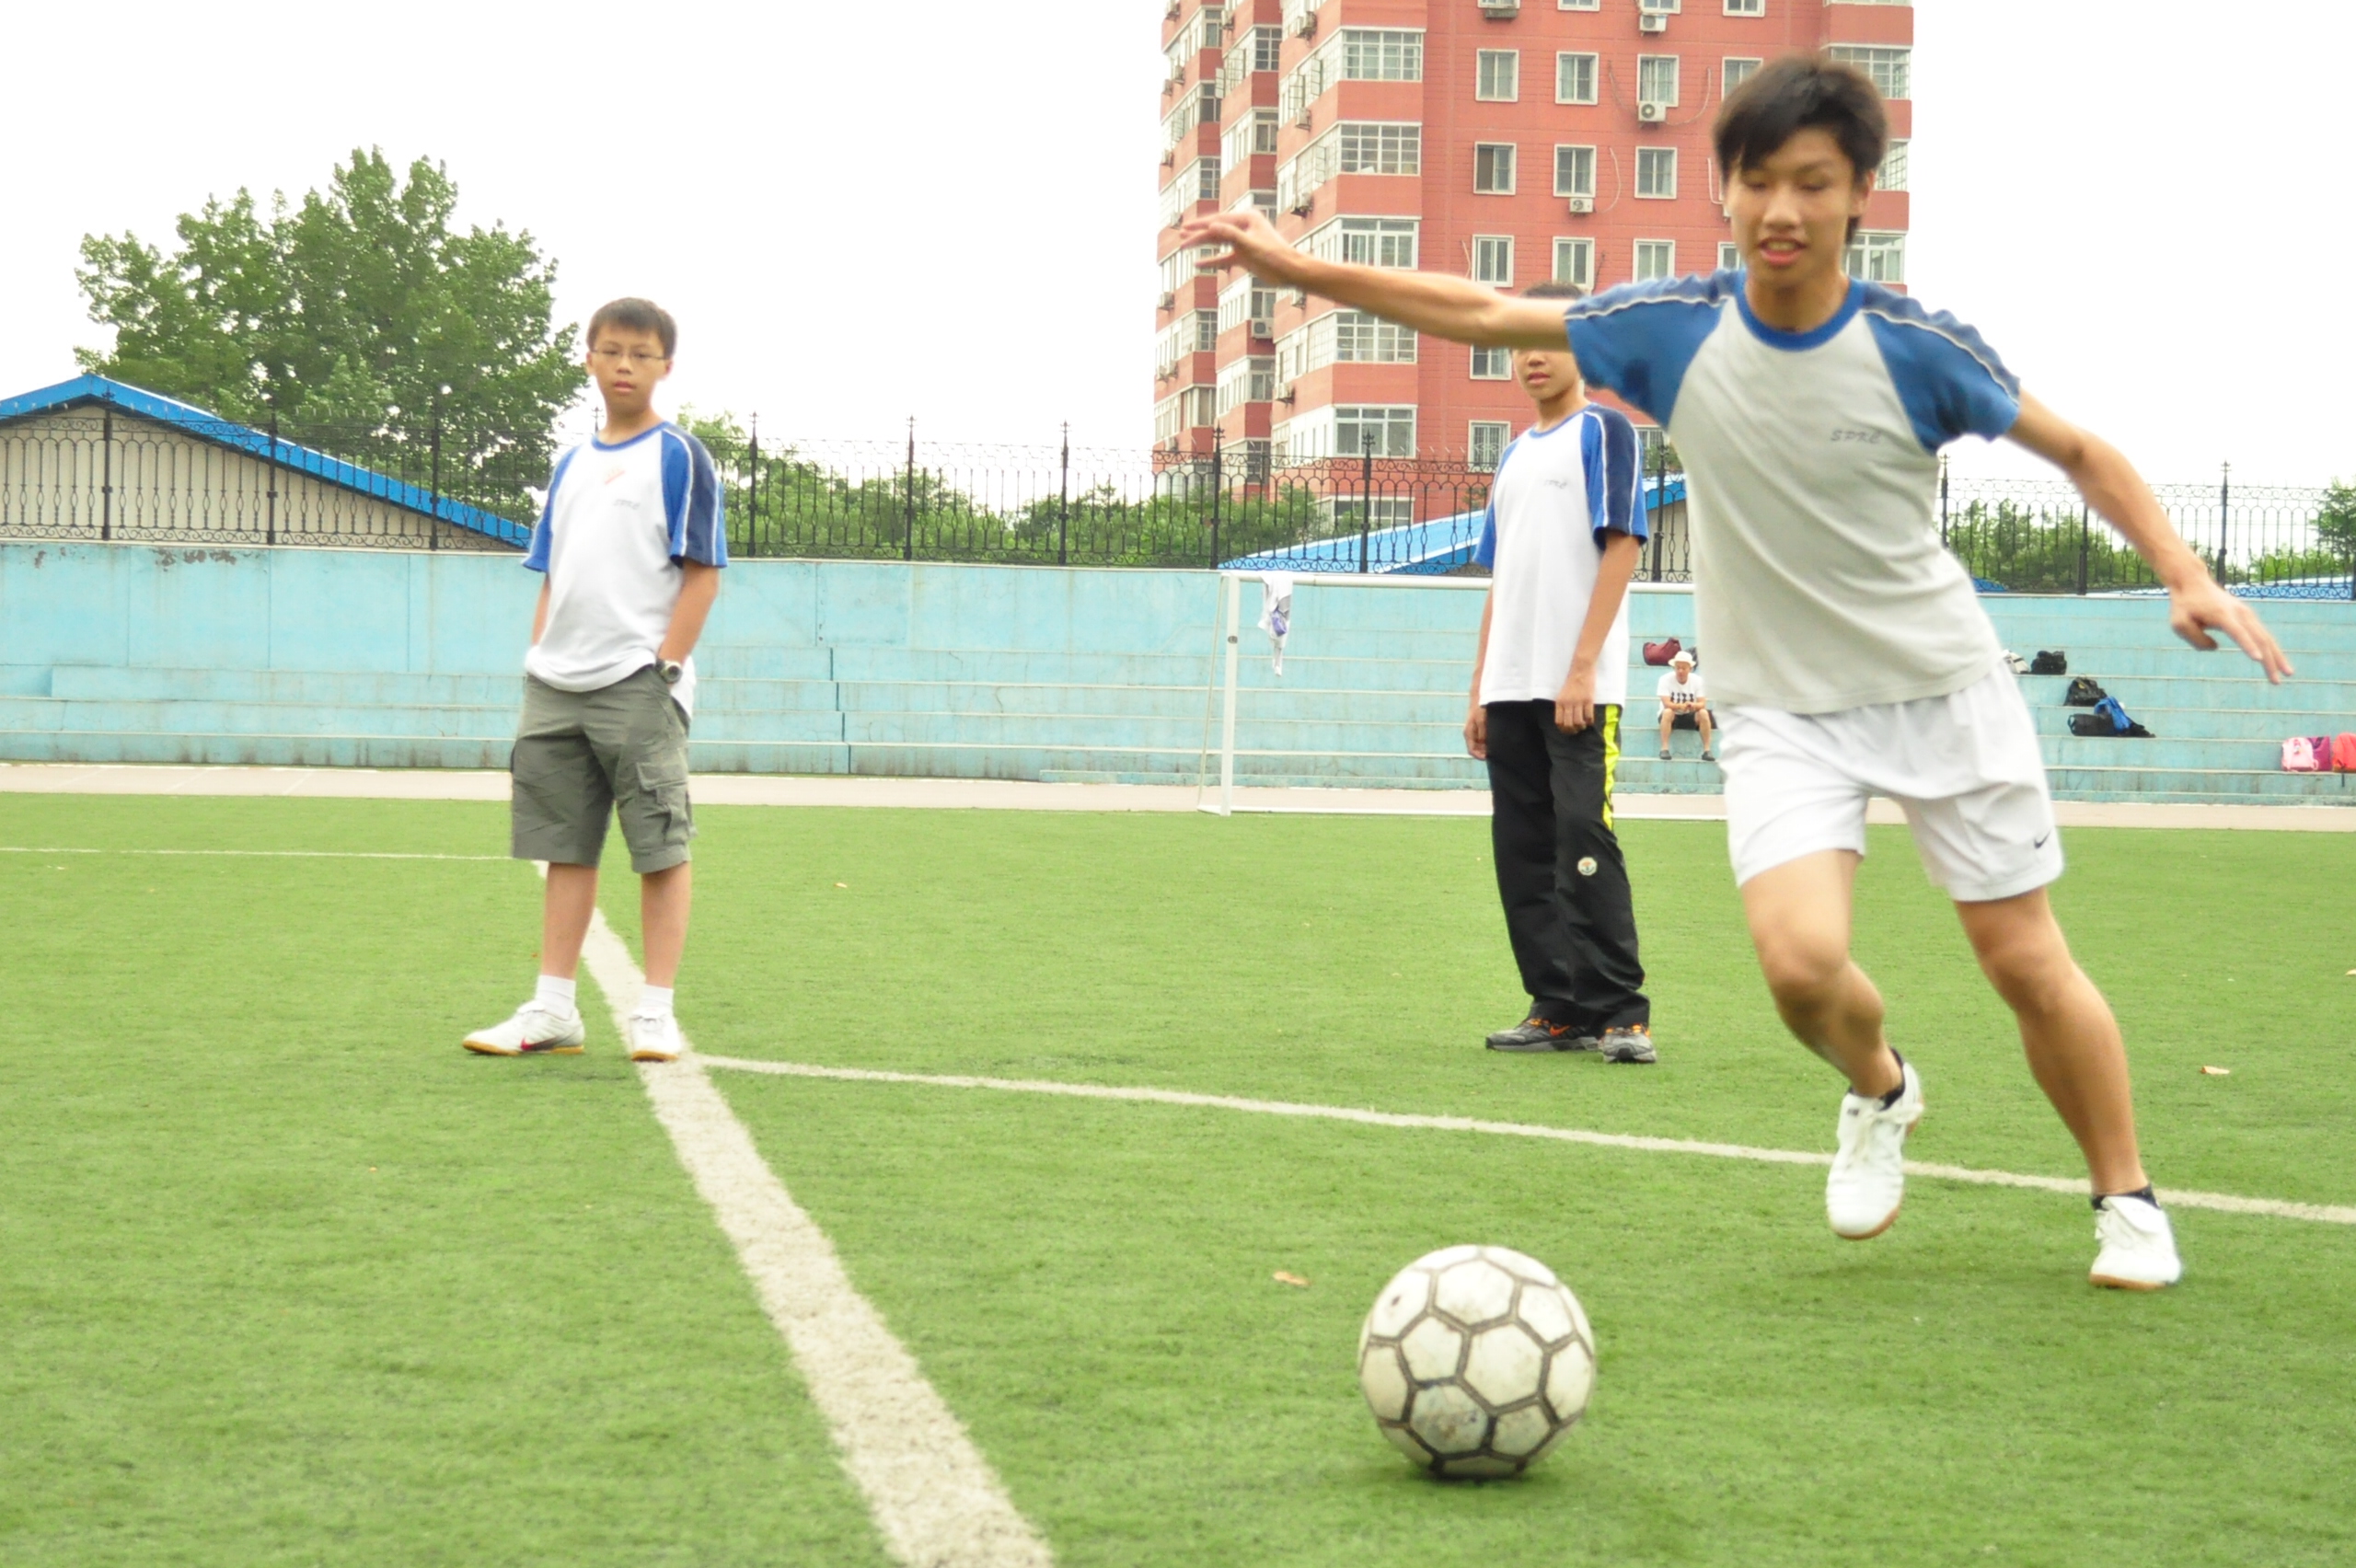 Learning Without Walls – Beijing Tour – Experiencing Sports and Culture in Mainland (14-06-2010-18-06-2010) and (21-06-2010-22-06-2010)